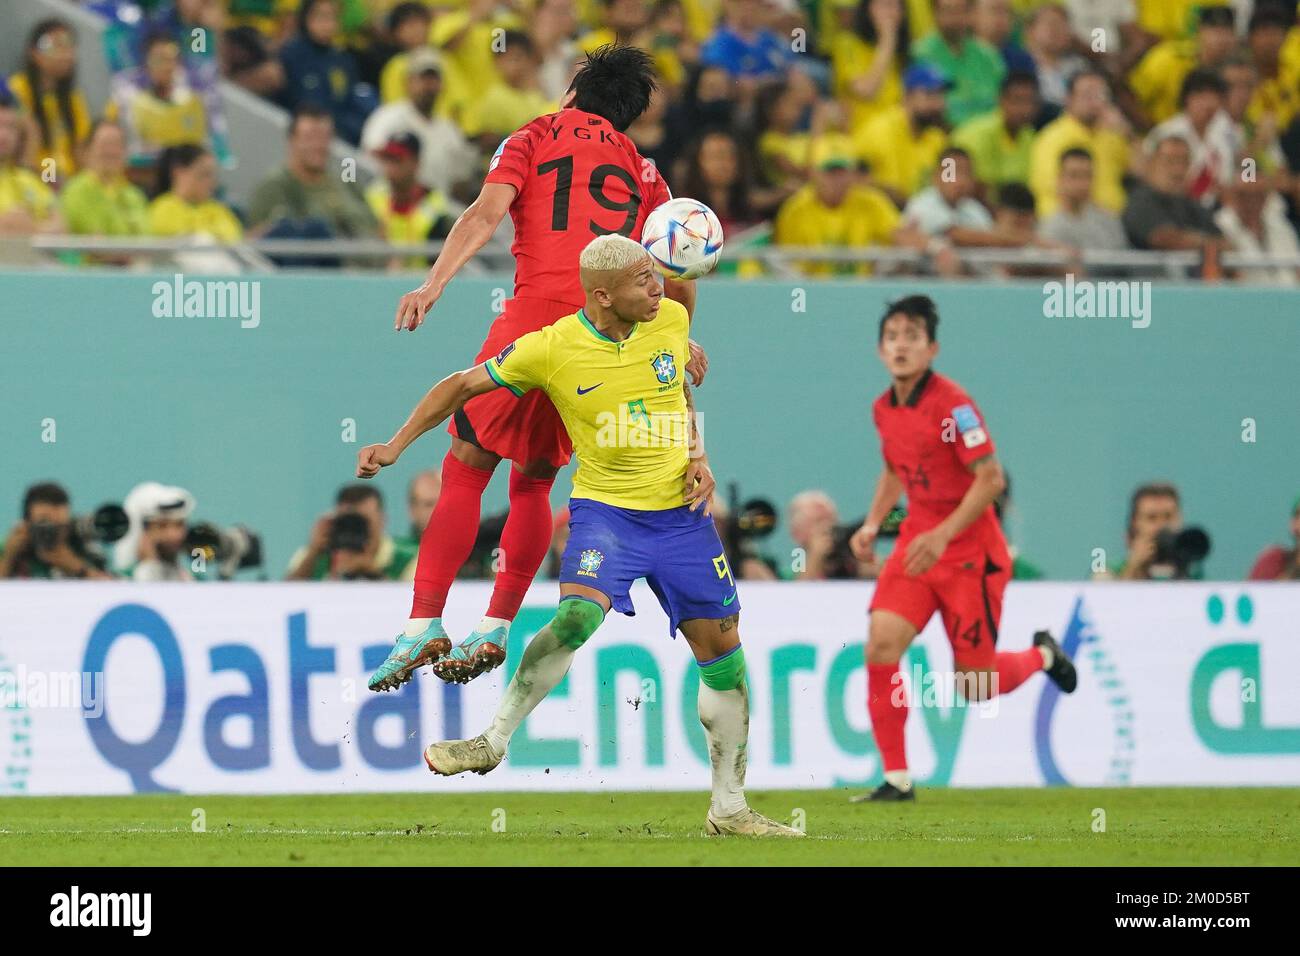 Doha, Qatar. 05th Dec, 2022. Stadium 974 DOHA, QATAR - DECEMBER 5: Player of Brazil Richarlison fights for the ball with player of South Korea Kim Young-gwon during the FIFA World Cup Qatar 2022 Round of 16 match between Brazil and South Korea at Stadium 974 on December 5, 2022 in Doha, Qatar. (Photo by Florencia Tan Jun/PxImages) (Florencia Tan Jun/SPP) Credit: SPP Sport Press Photo. /Alamy Live News Stock Photo